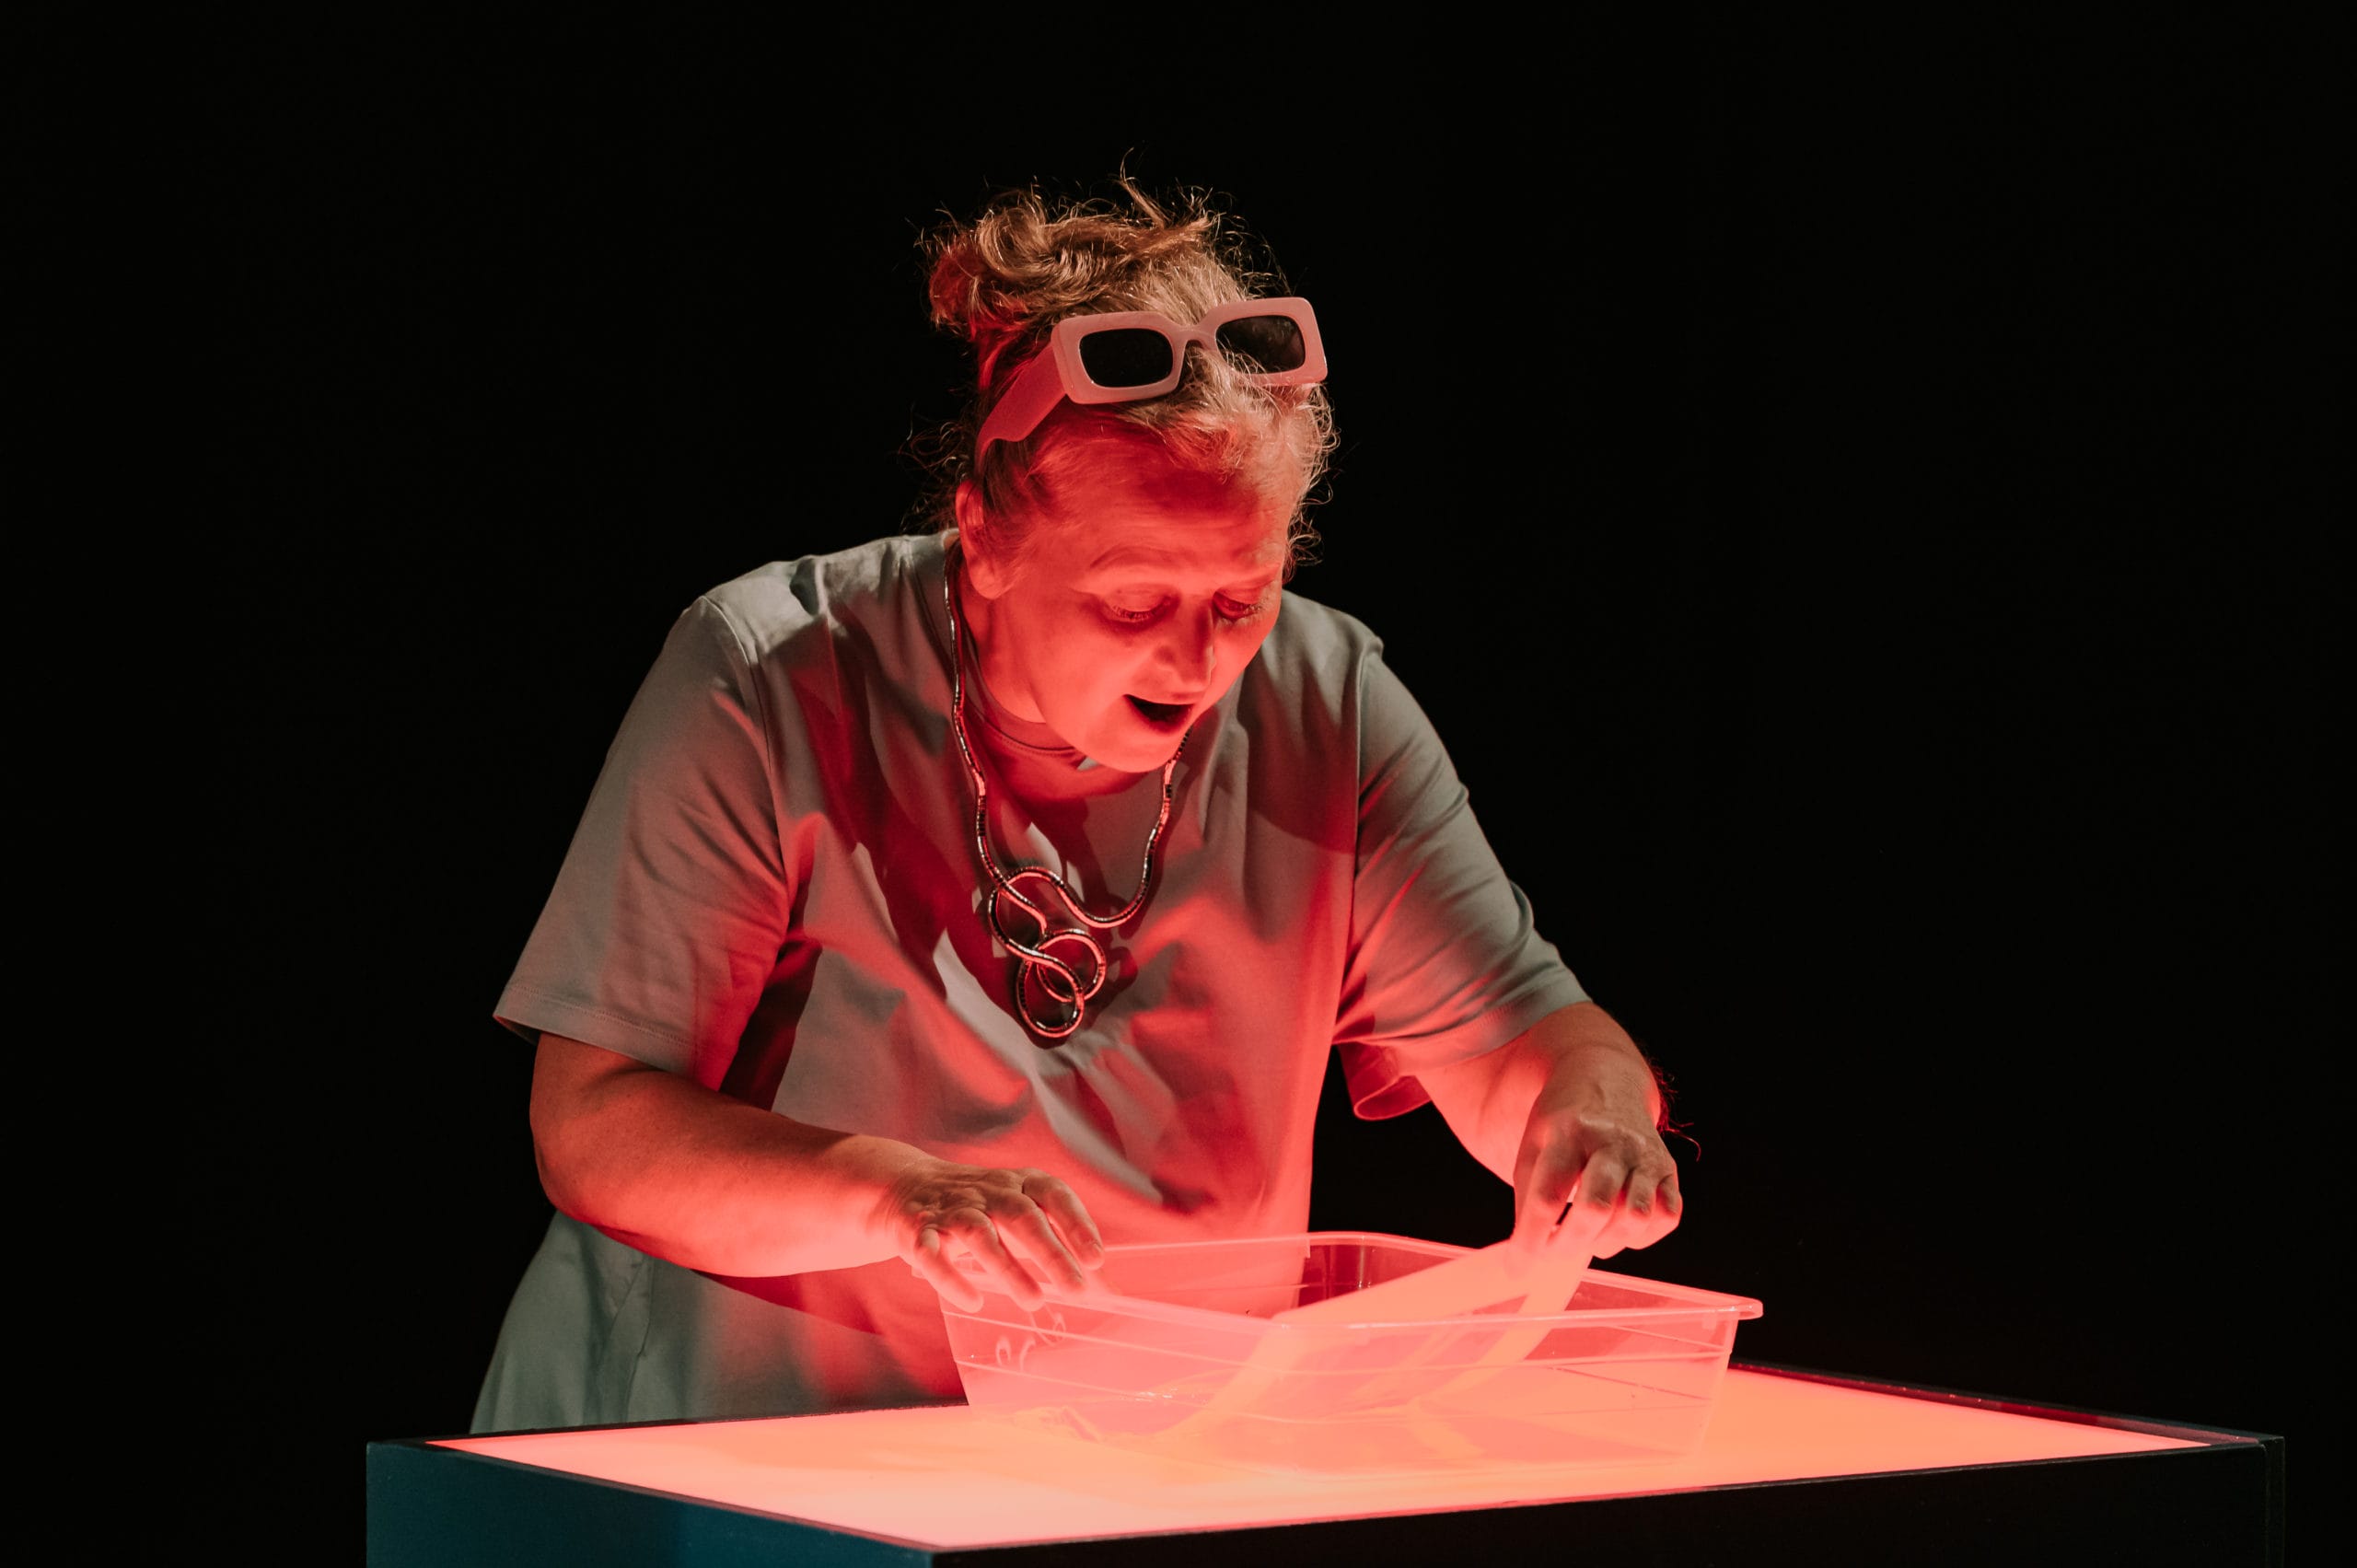 A white woman stands developing a photo in developing liquid, cast in red light.